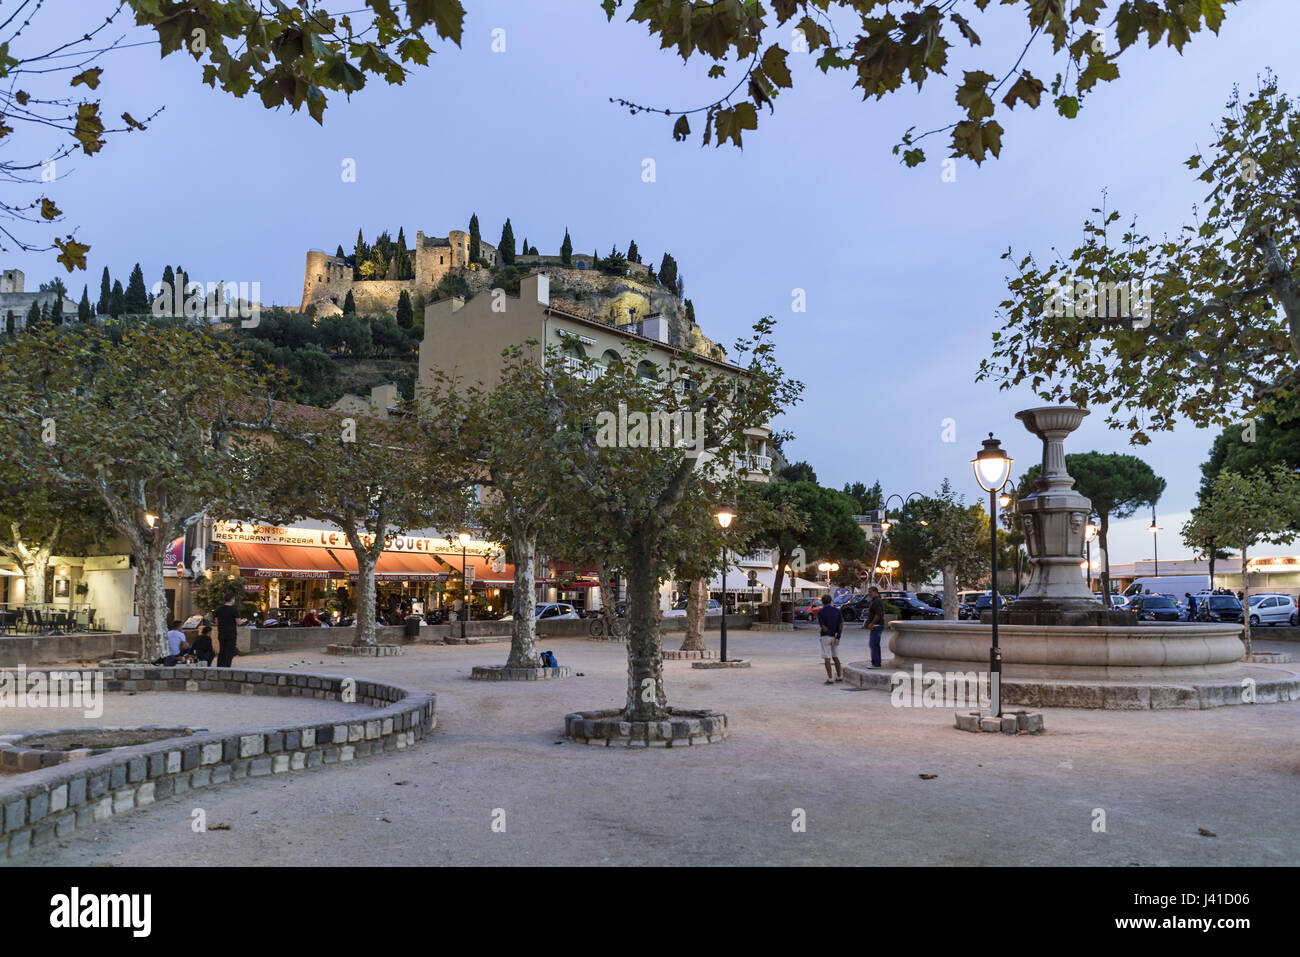 Boules in a square near the harbour, Fortress in the background, Cassis, Cote d Azur, France Stock Photo